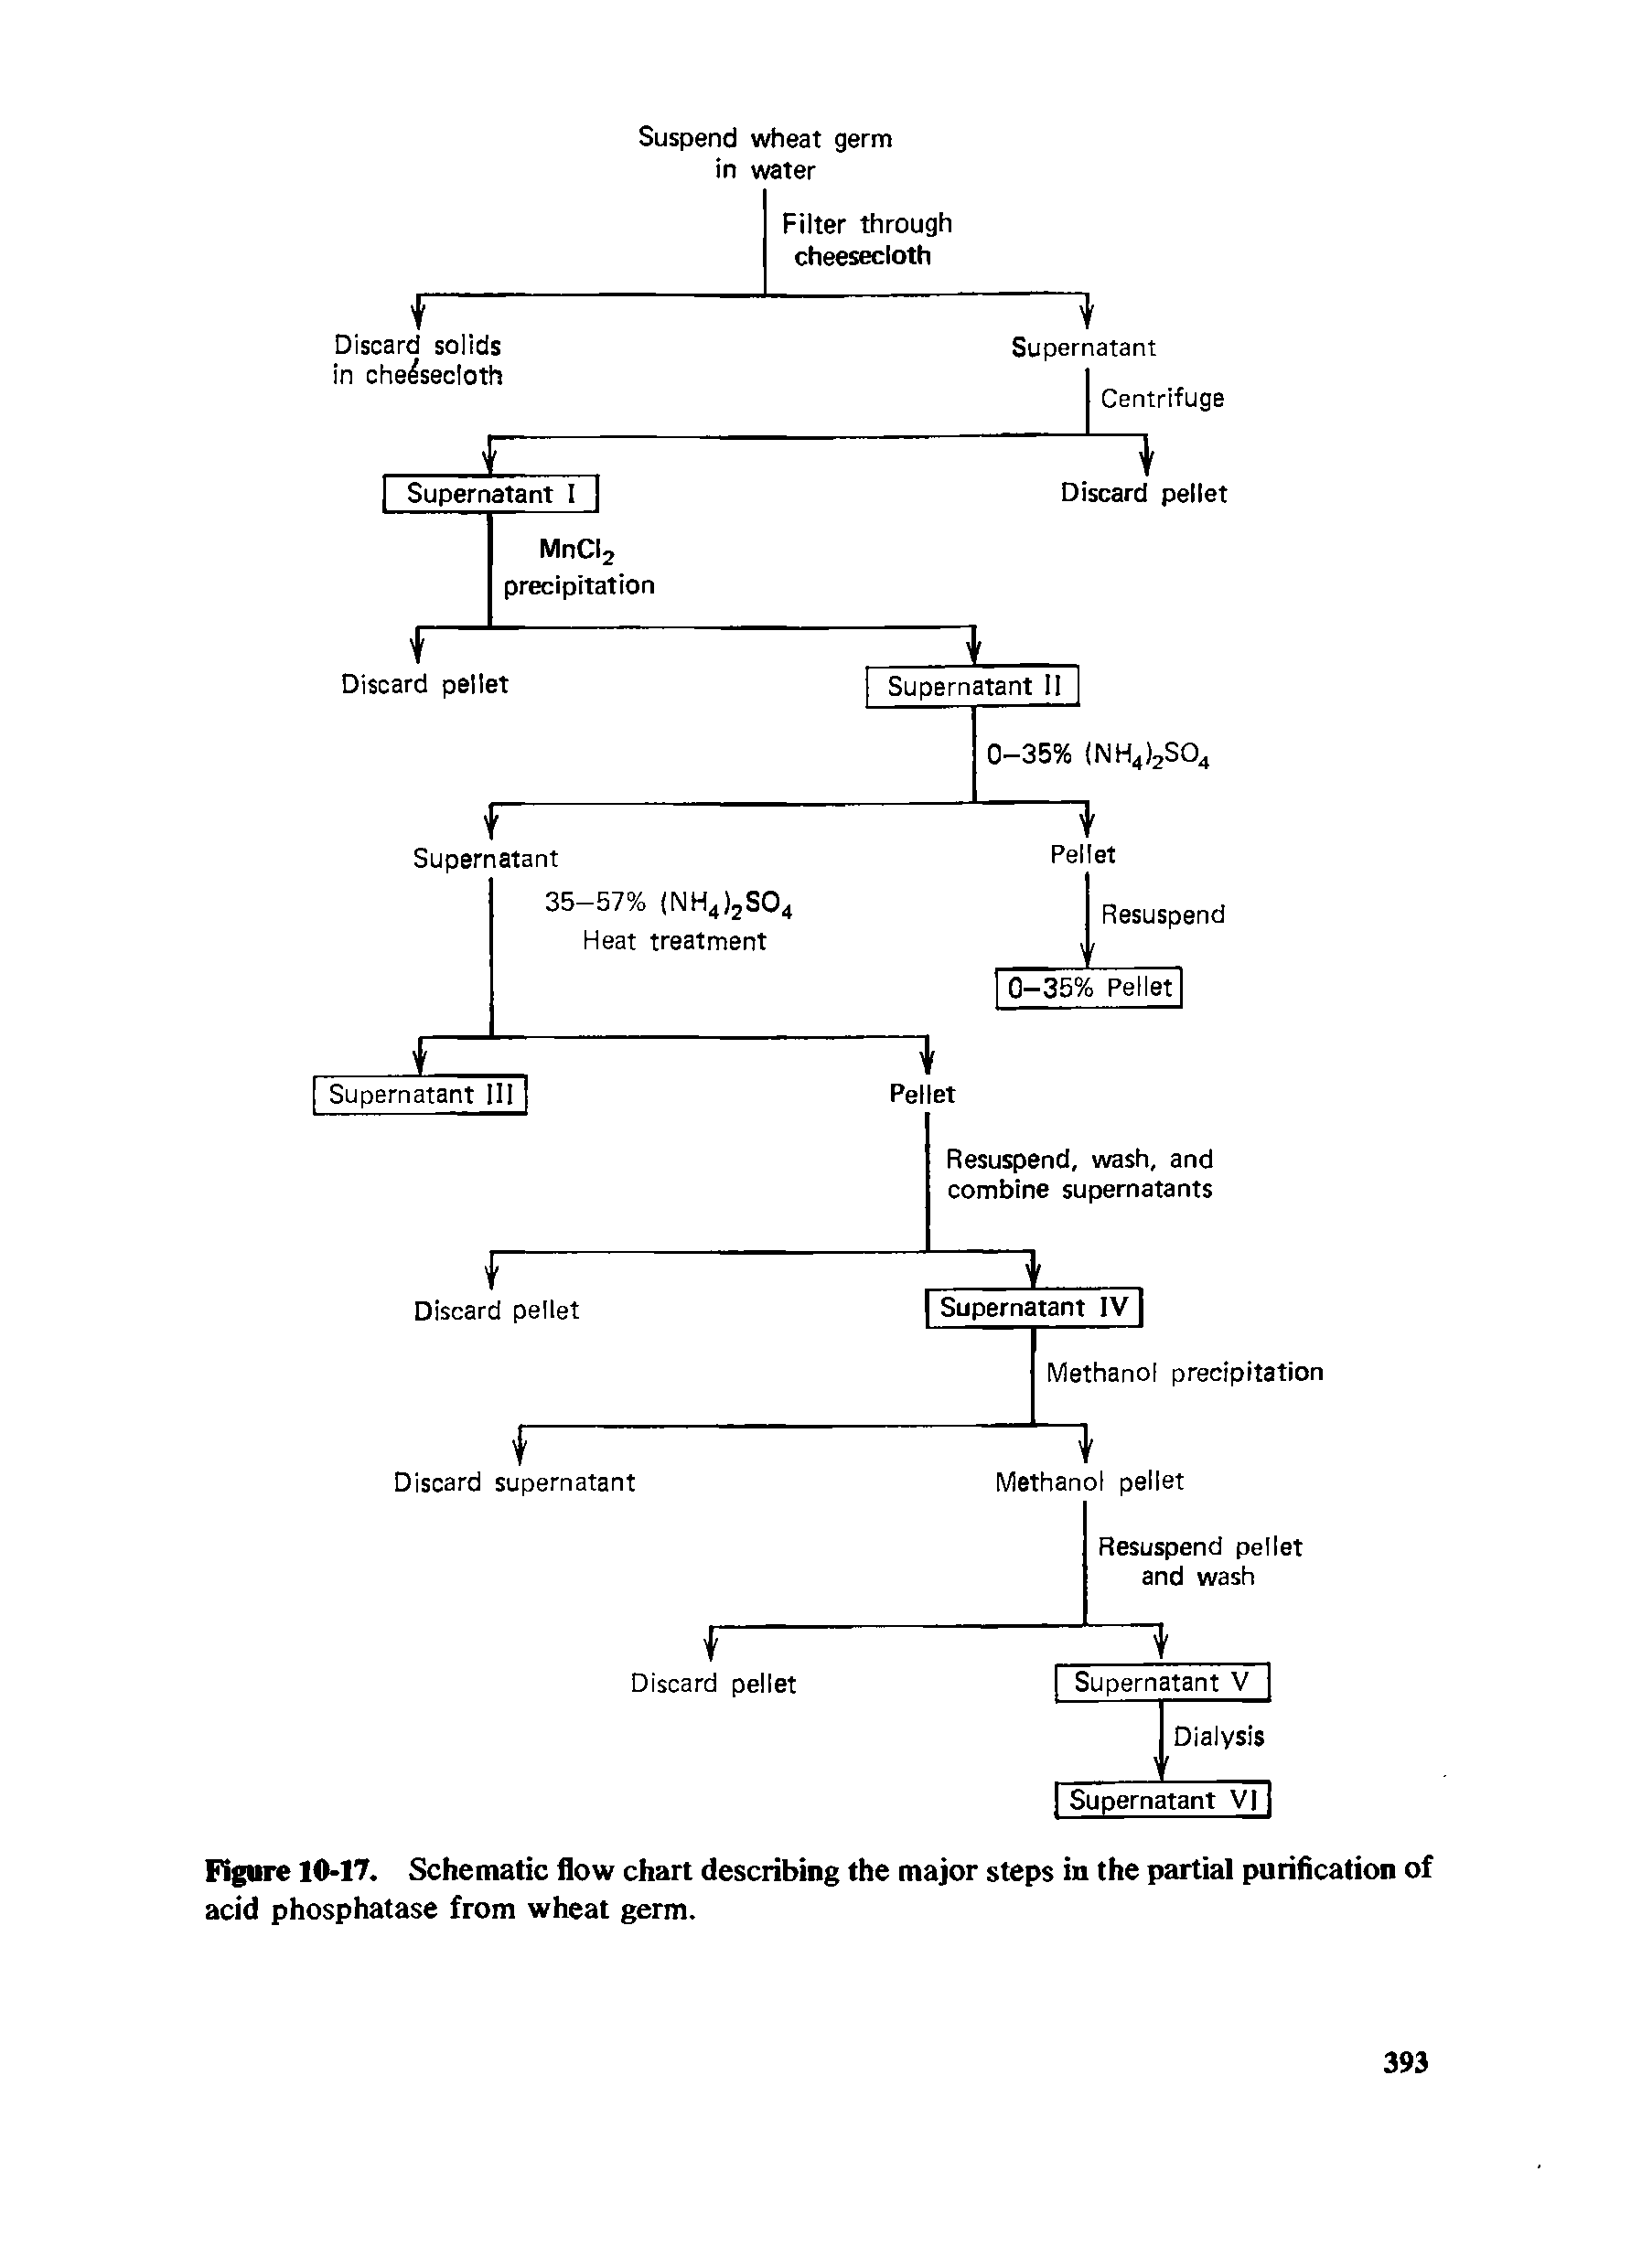 Figure 10-17. Schematic flow chart describing the major steps in the partial purification of acid phosphatase from wheat germ.